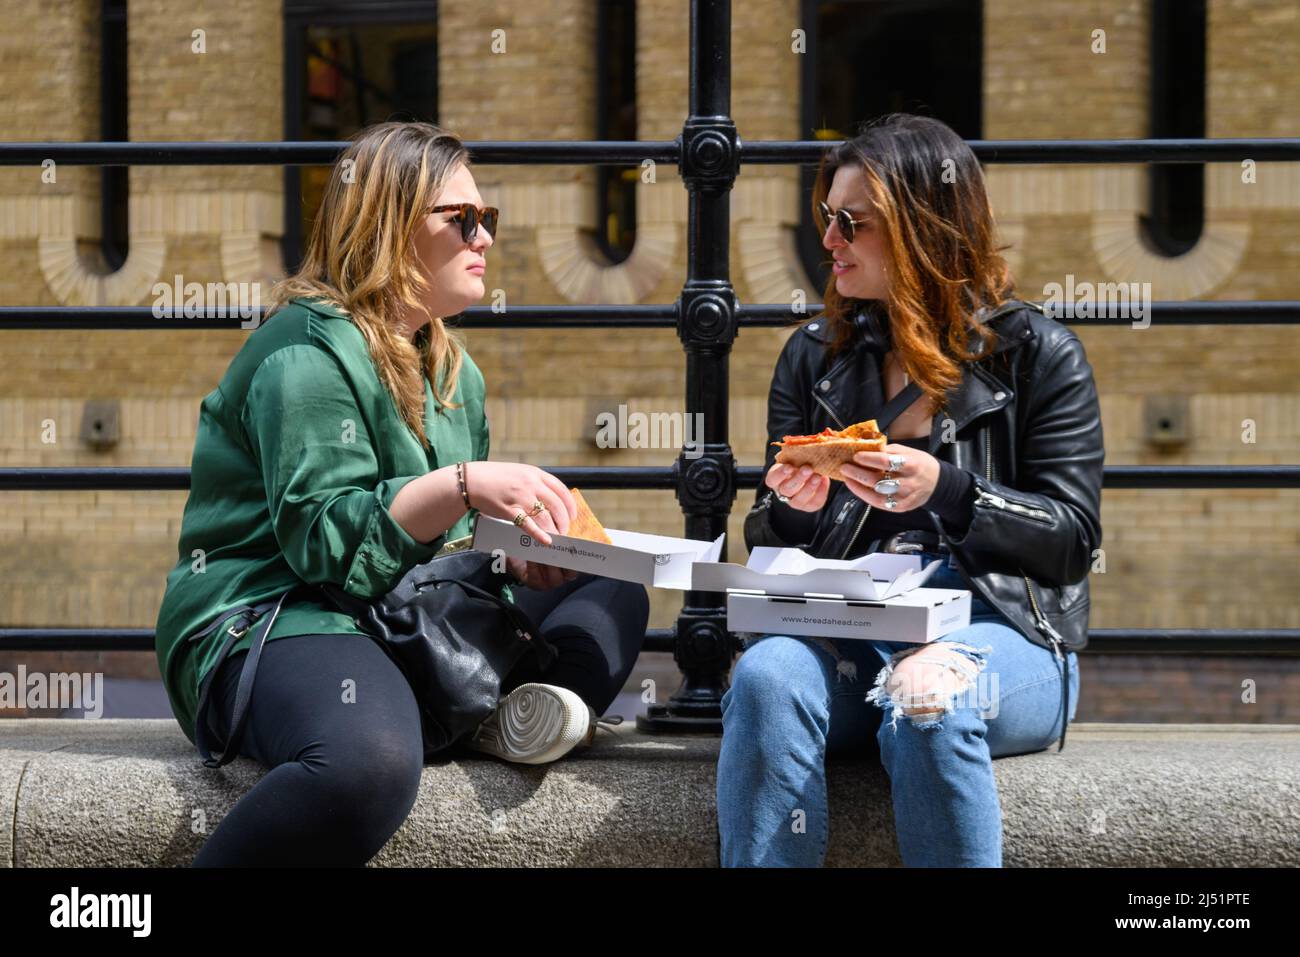 Two women chatting over pizza from a box at lunchtime outdoors, London, UK, April Stock Photo